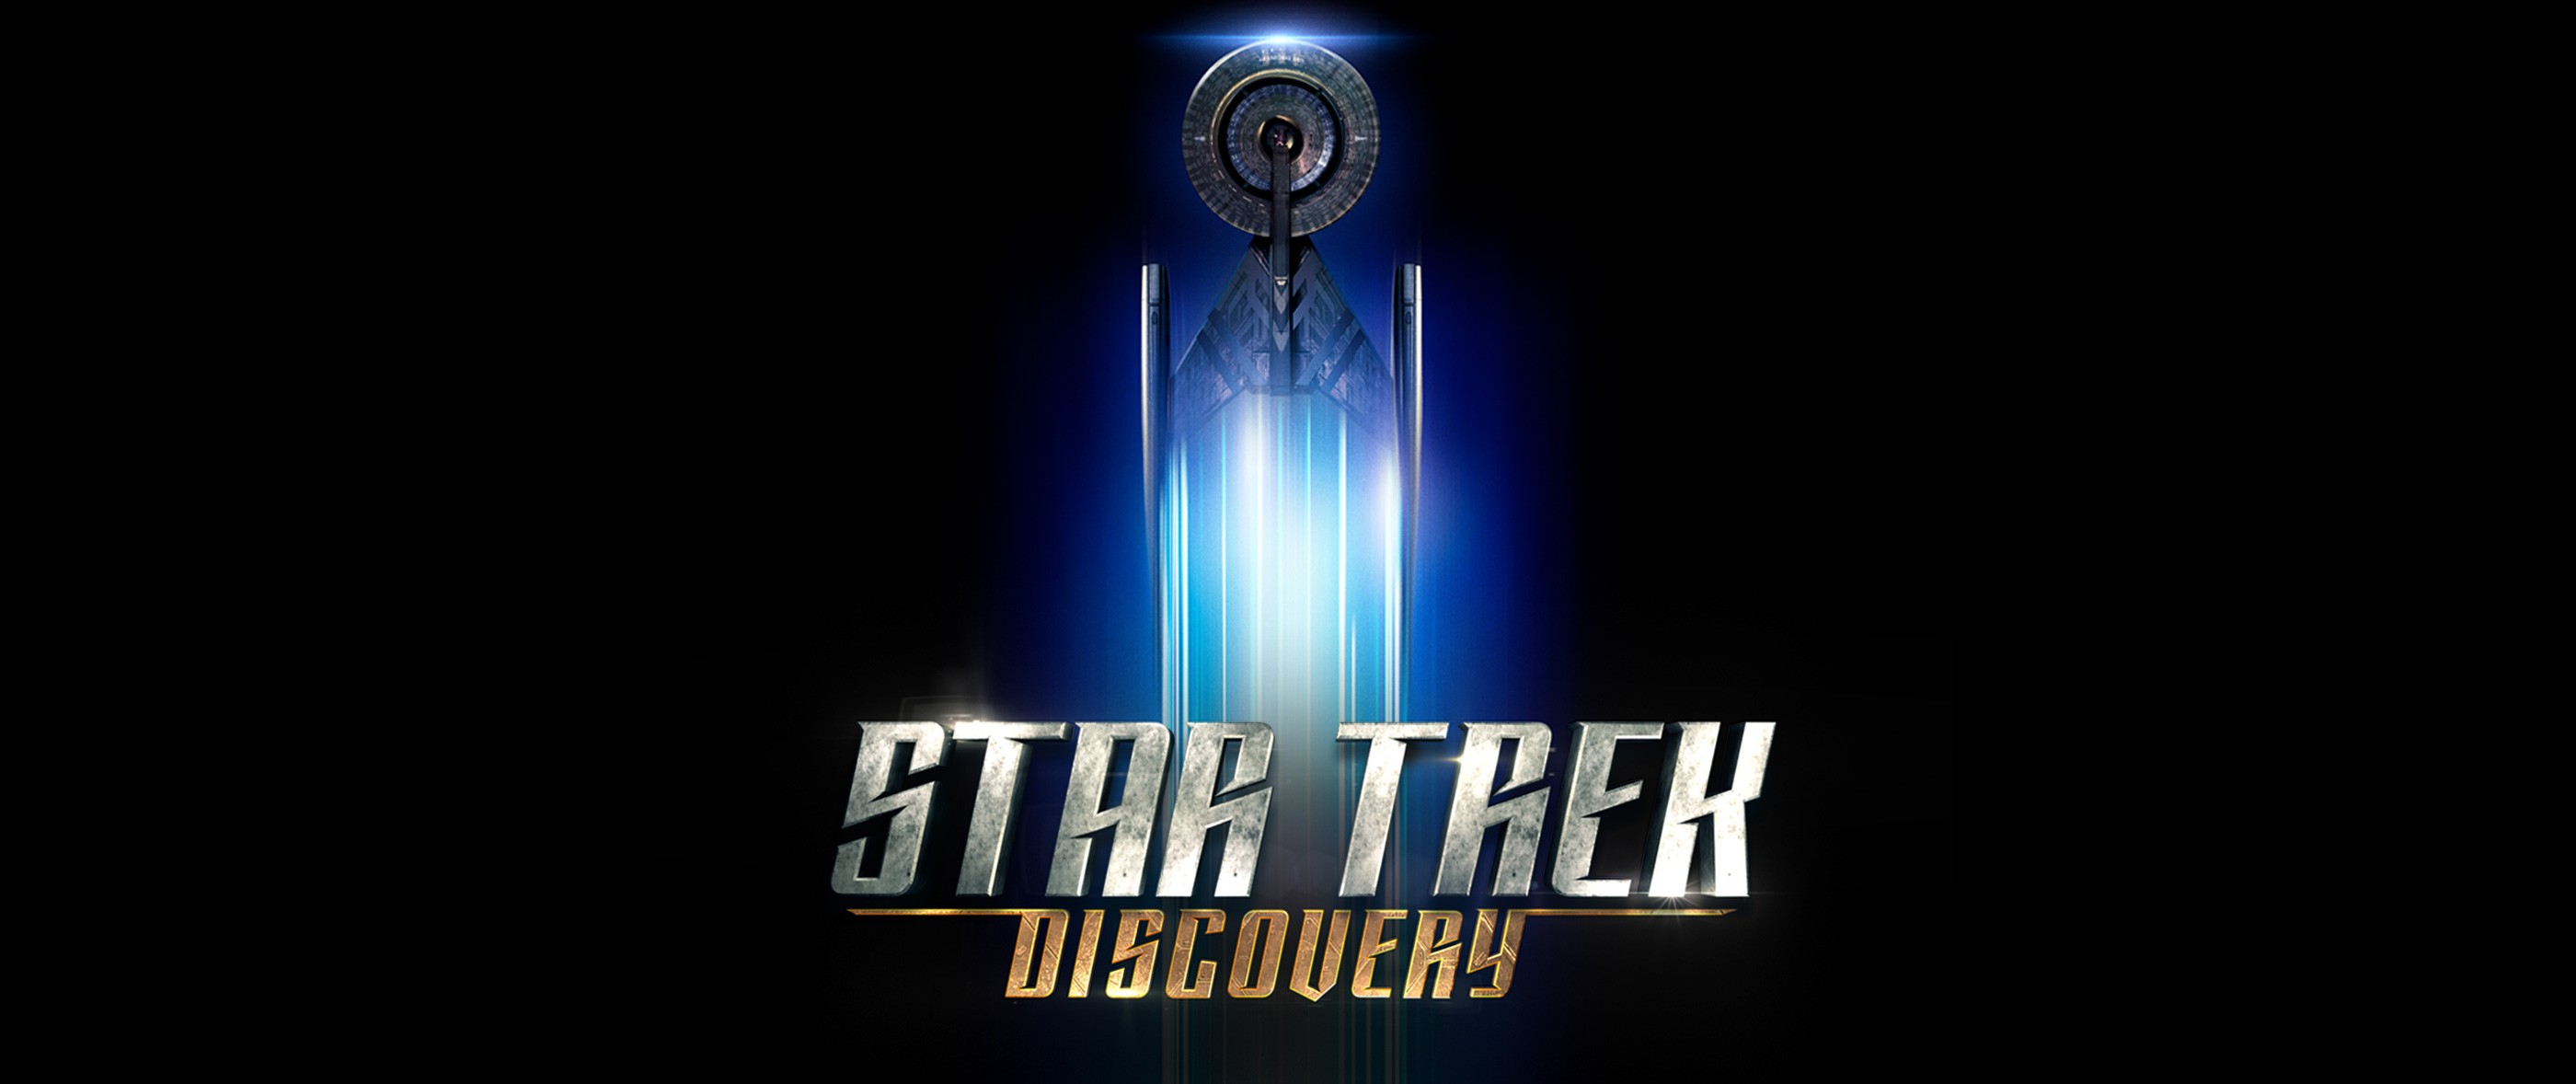 Star Trek: Discovery Releases New Trailer #SDCC2017